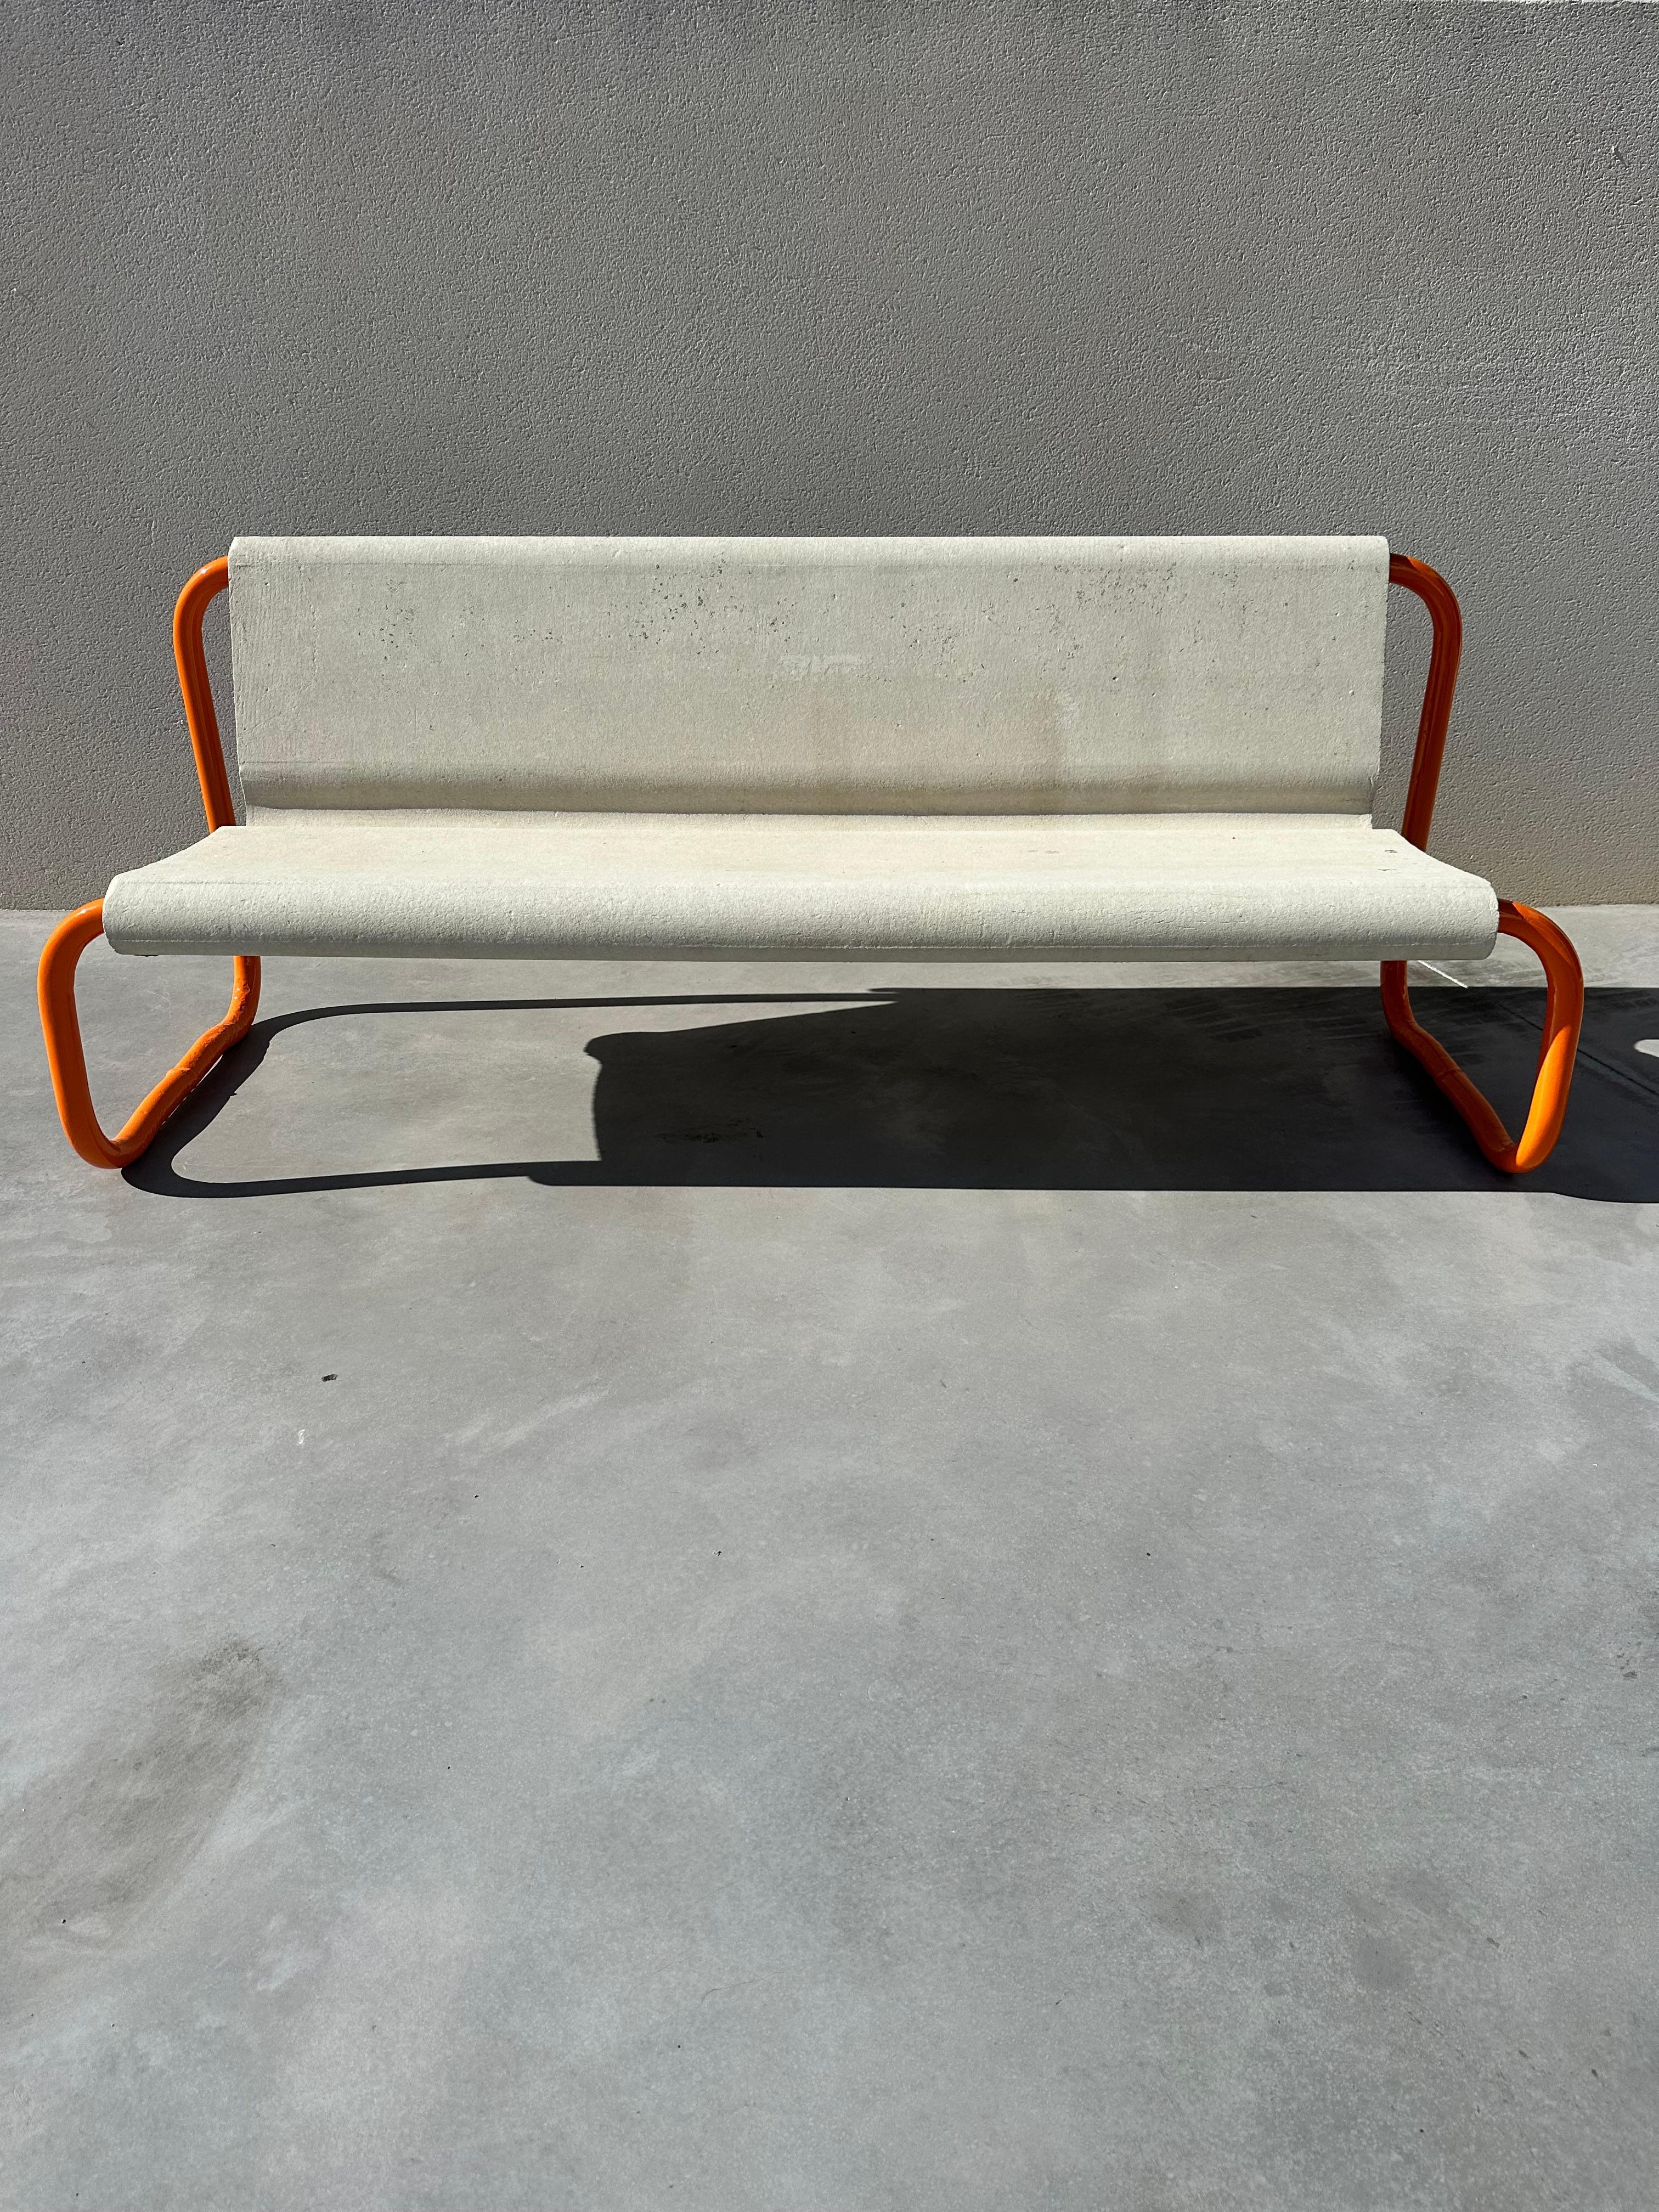 Mid-century floating bench designed by Swiss Architect Willy Guhl.

Seater concrete monocoque is in good condition and the tubular steel base has been completely restored, sanded and repainted with orange paint. Work carried out by a professional